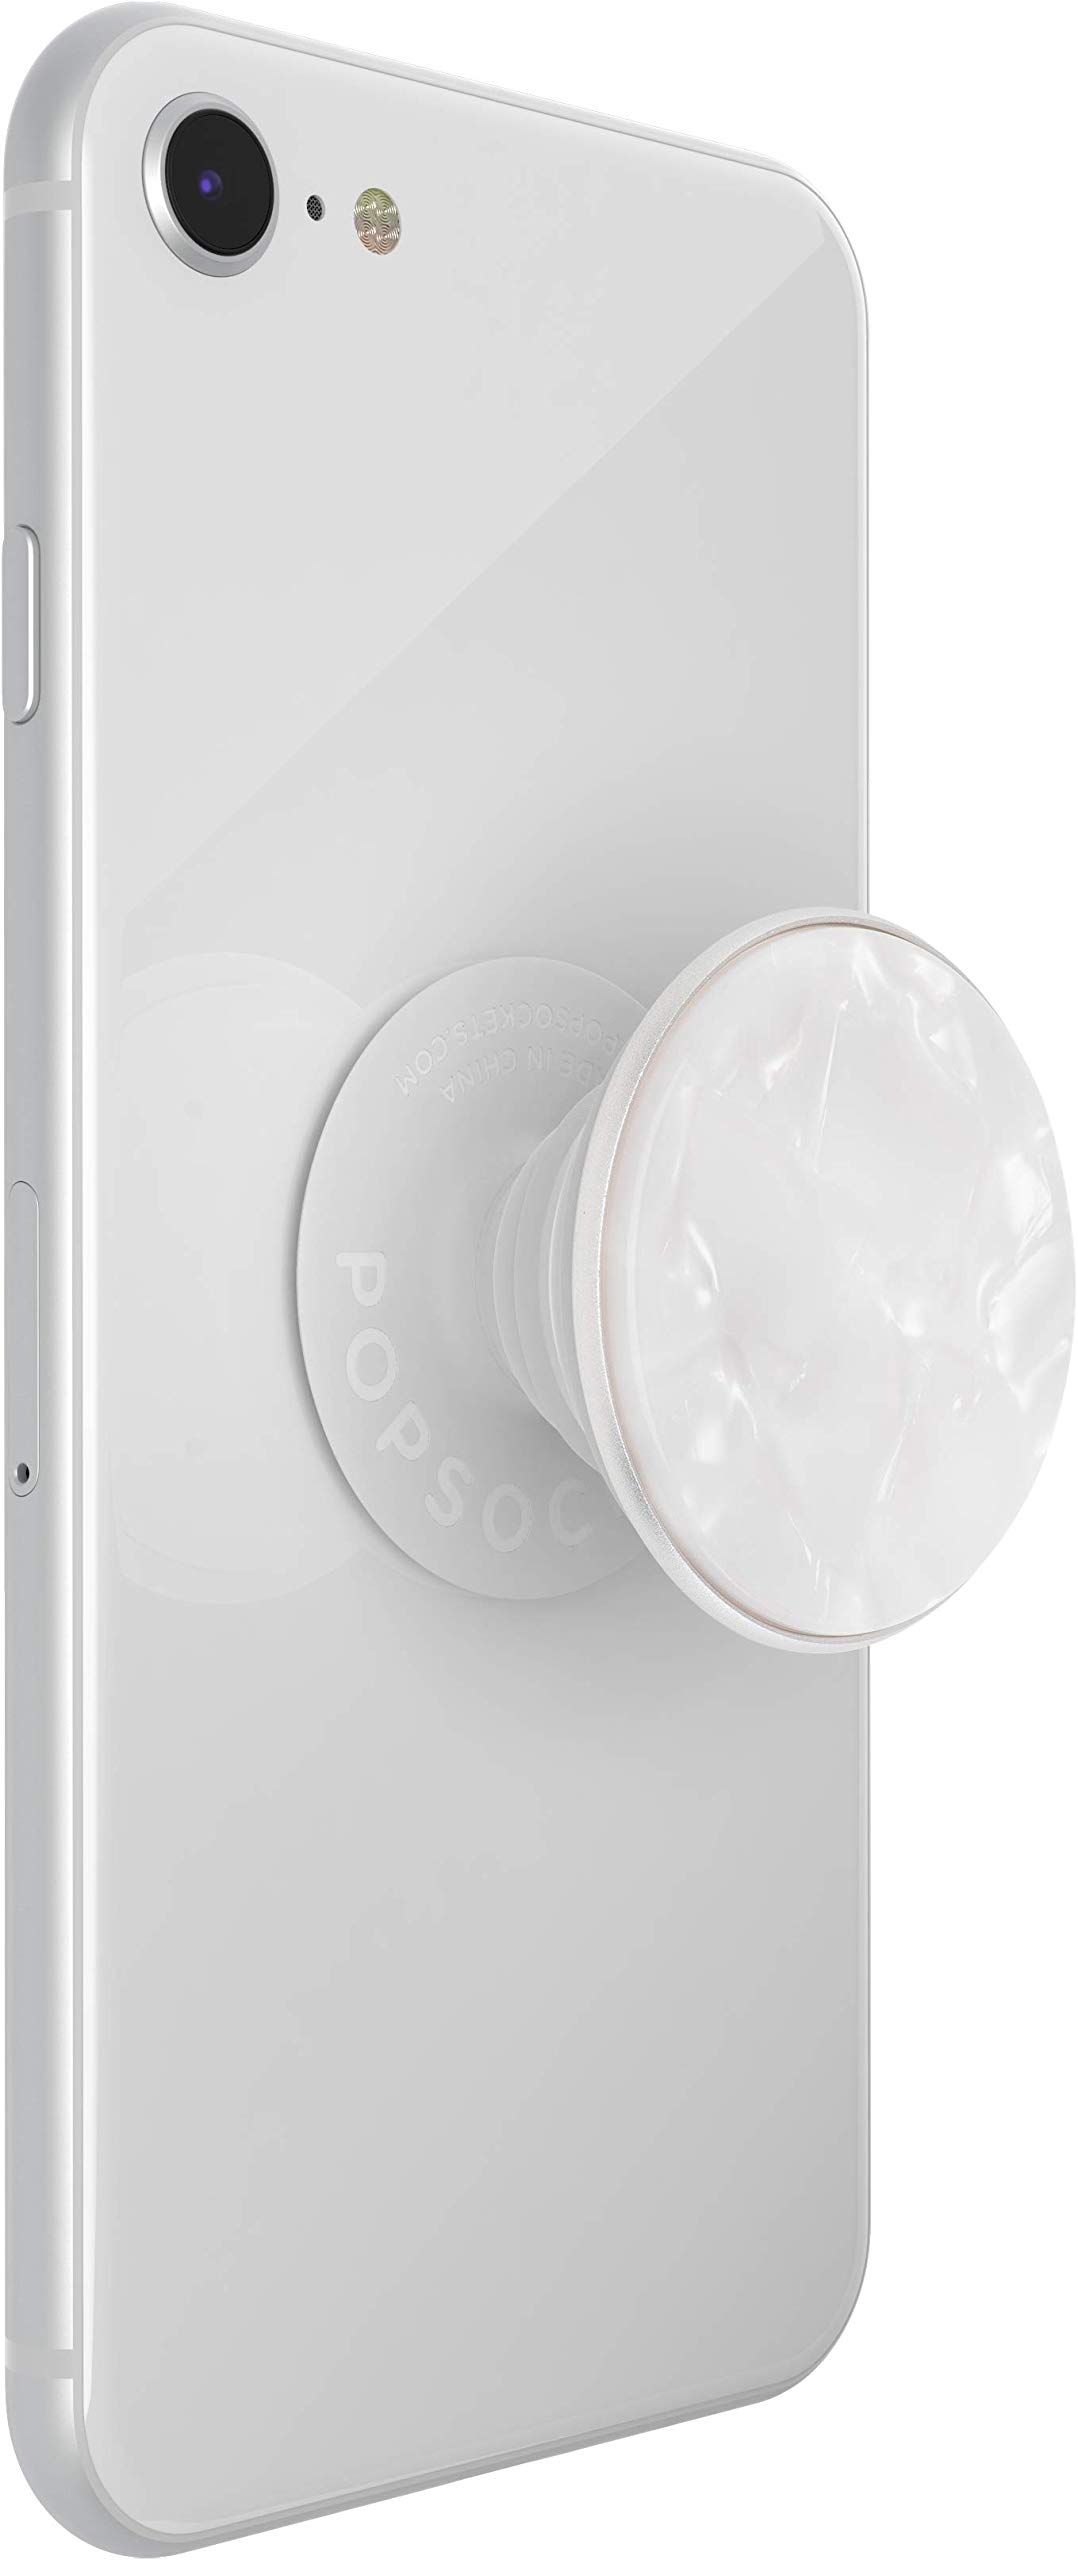 PopSockets: Phone Grip with Expanding Kickstand, Pop Socket for Phone - Pearl White